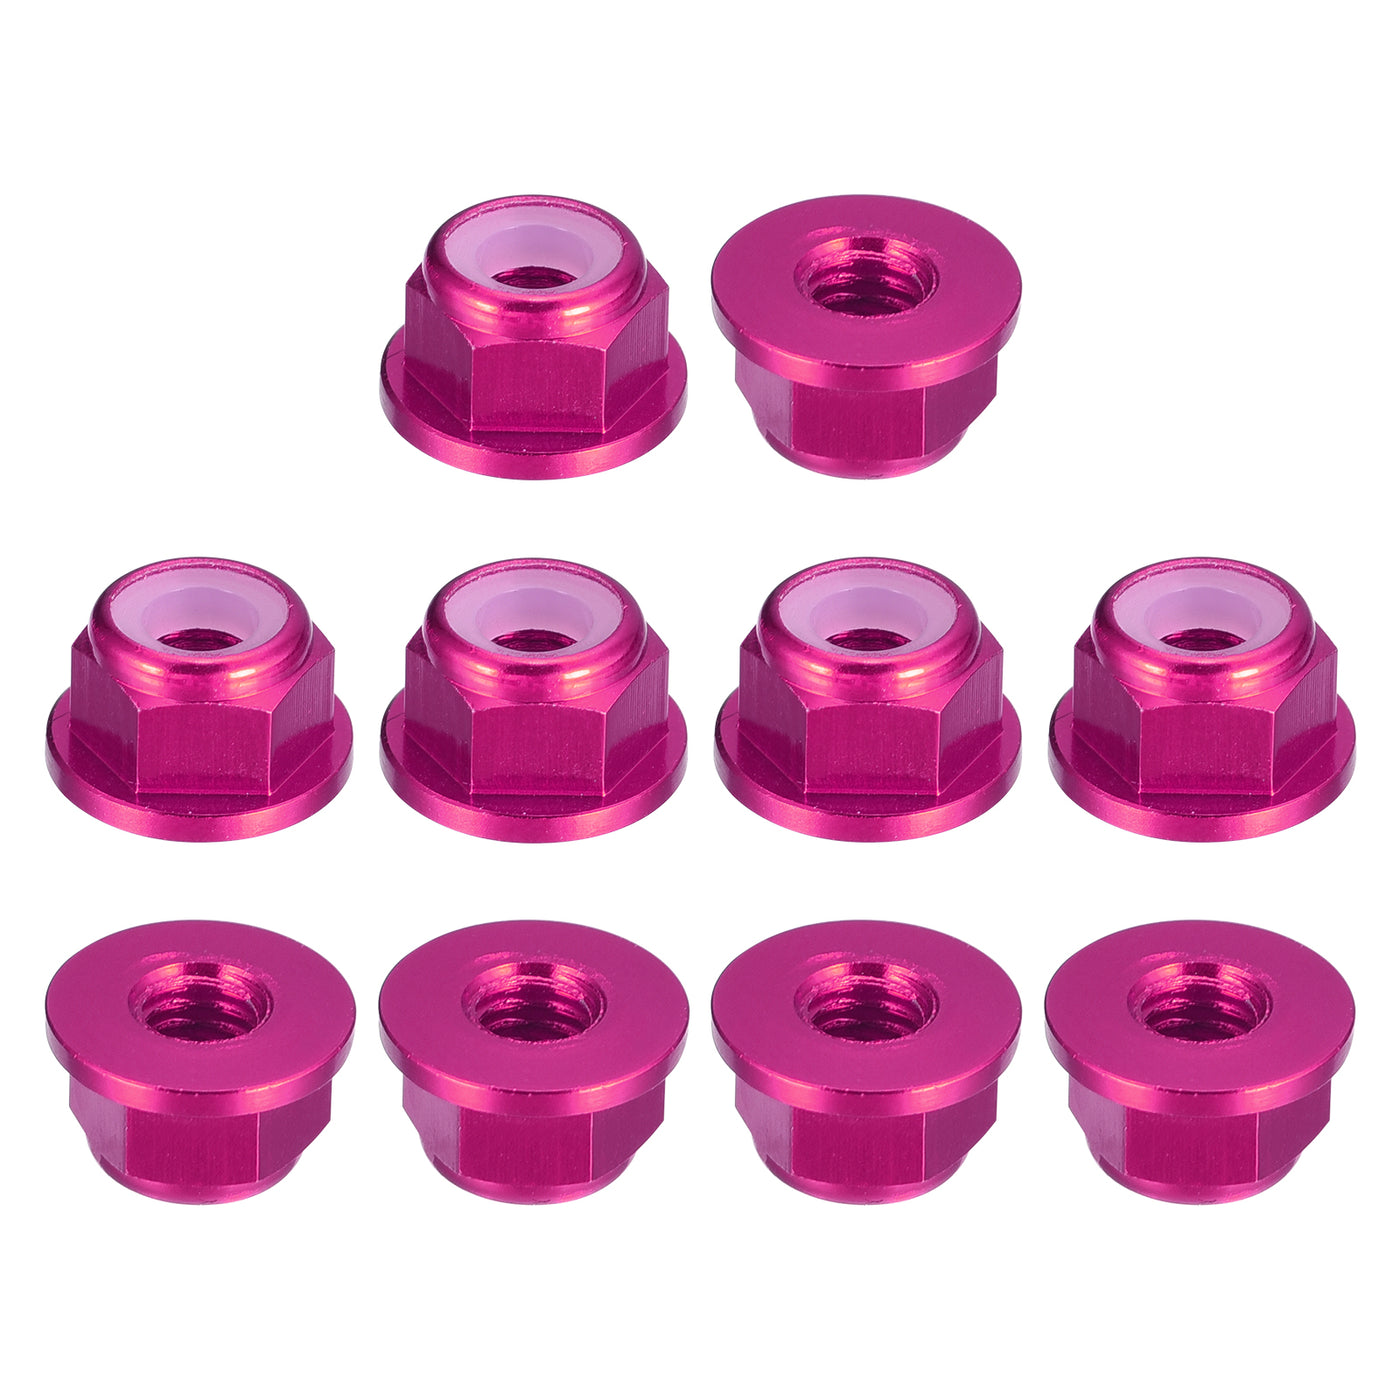 uxcell Uxcell Nylon Insert Hex Lock Nuts, 10pcs - M5 x 0.8mm Aluminum Alloy Self-Locking Nut, Anodizing Flange Lock Nut for Fasteners (Pink)